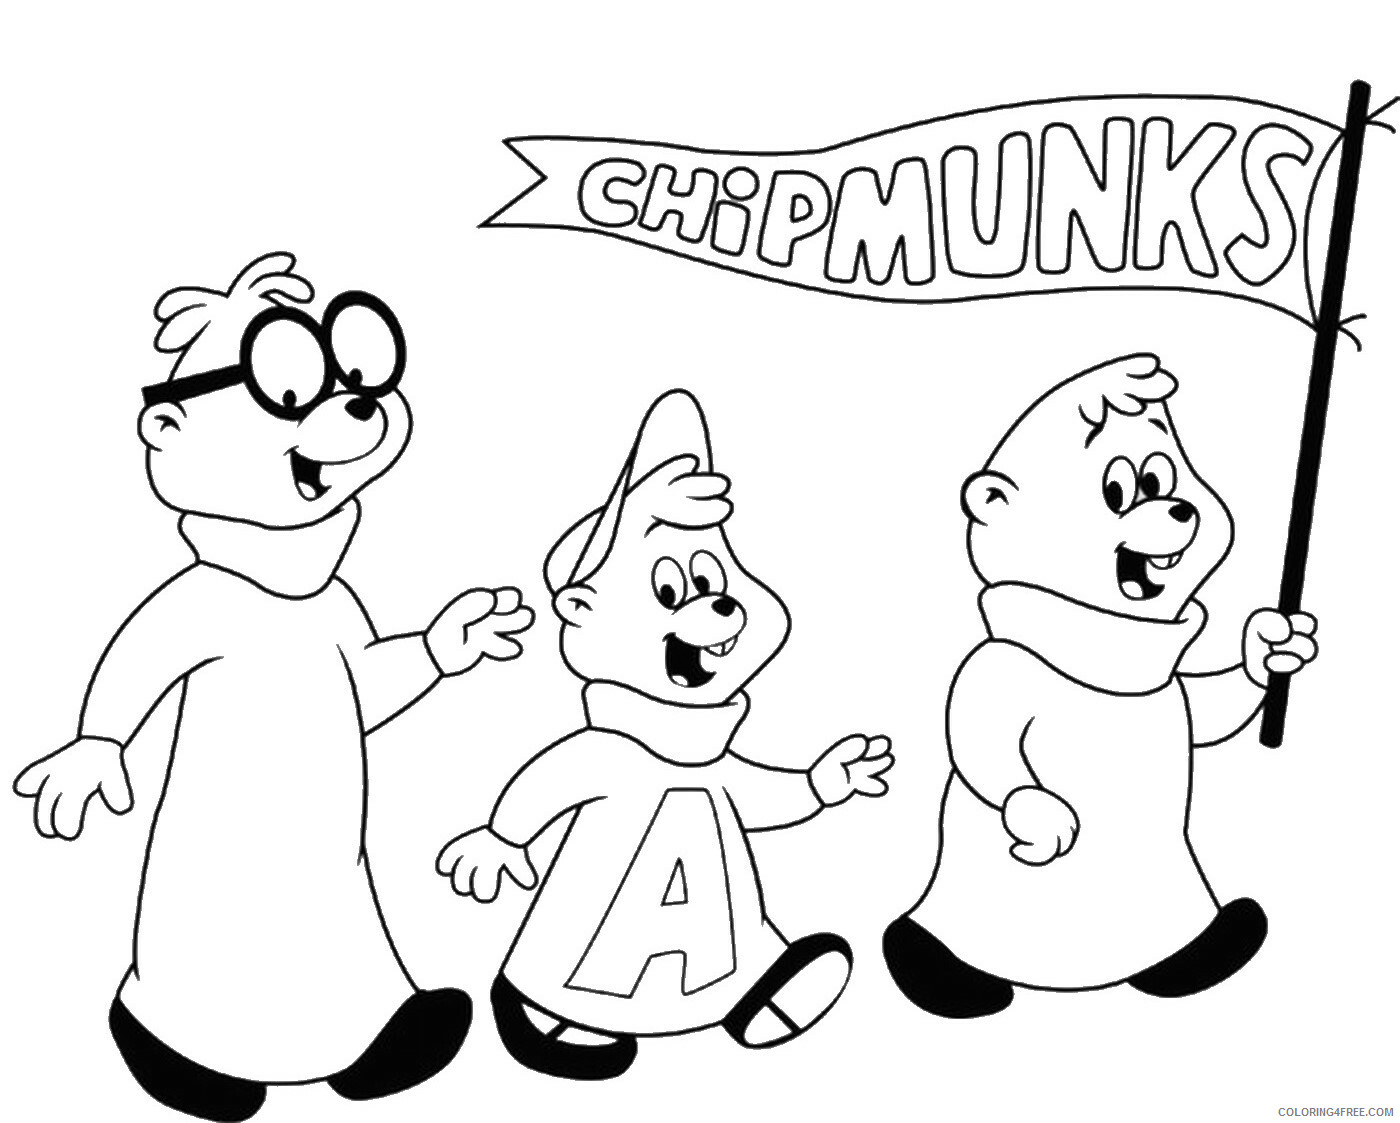 Alvin and the Chipmunks Coloring Pages TV Film alvin_cl_17 Printable 2020 00057 Coloring4free